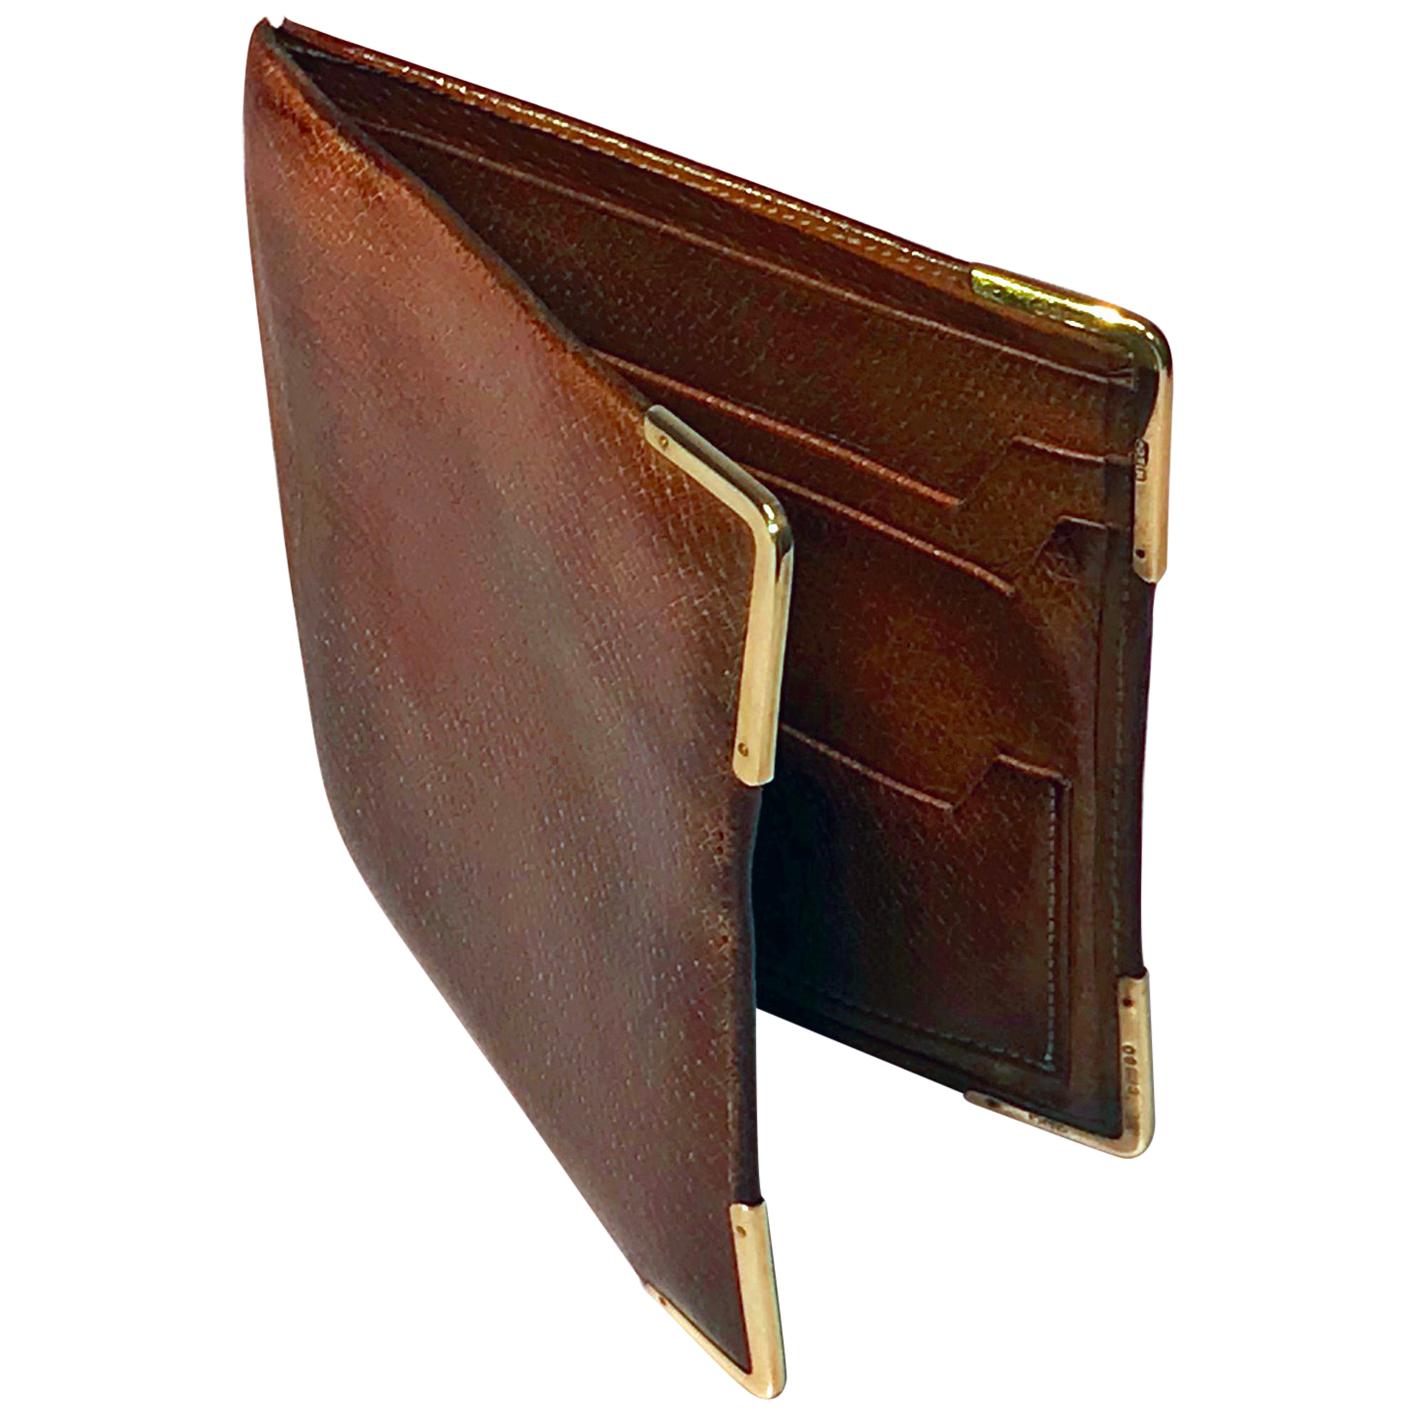 Gold and Leather Dunhill Wallet, London, 1967